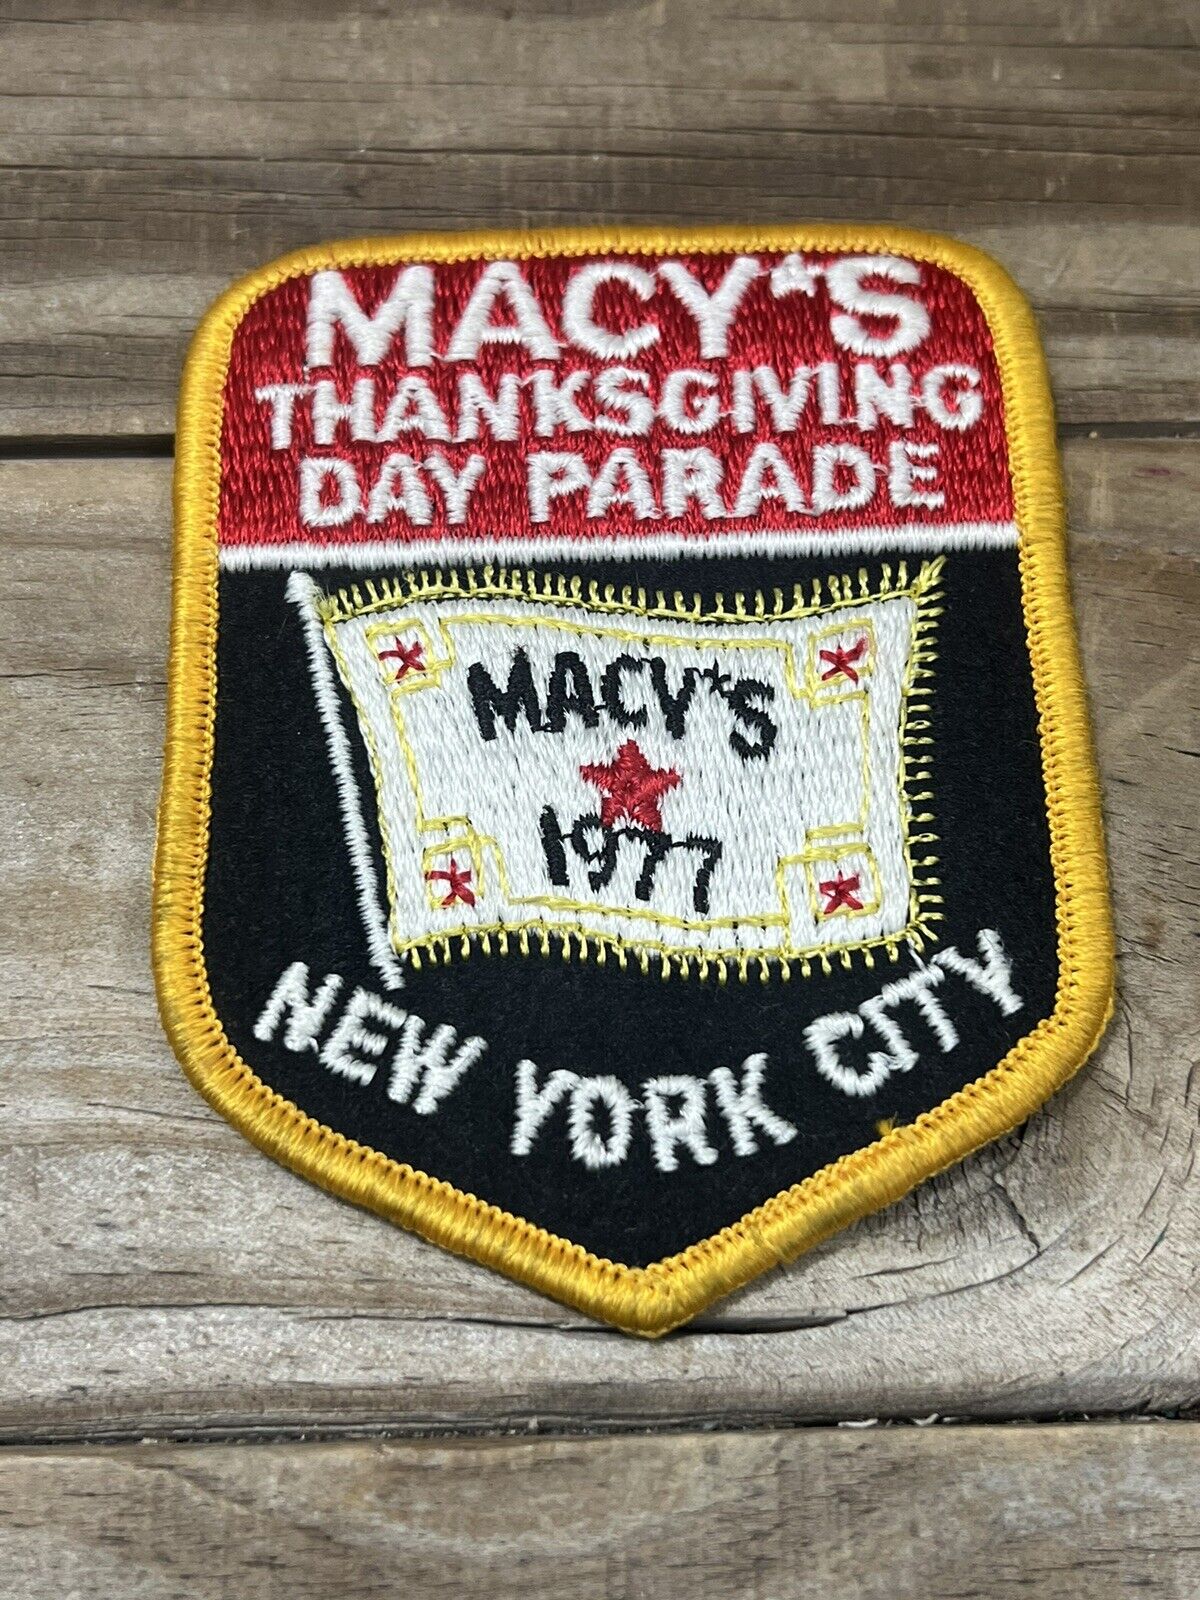 Vintage Rare 1977 MACY’S THANSGIVING DAY PARADE Sew On Patch New York City NY